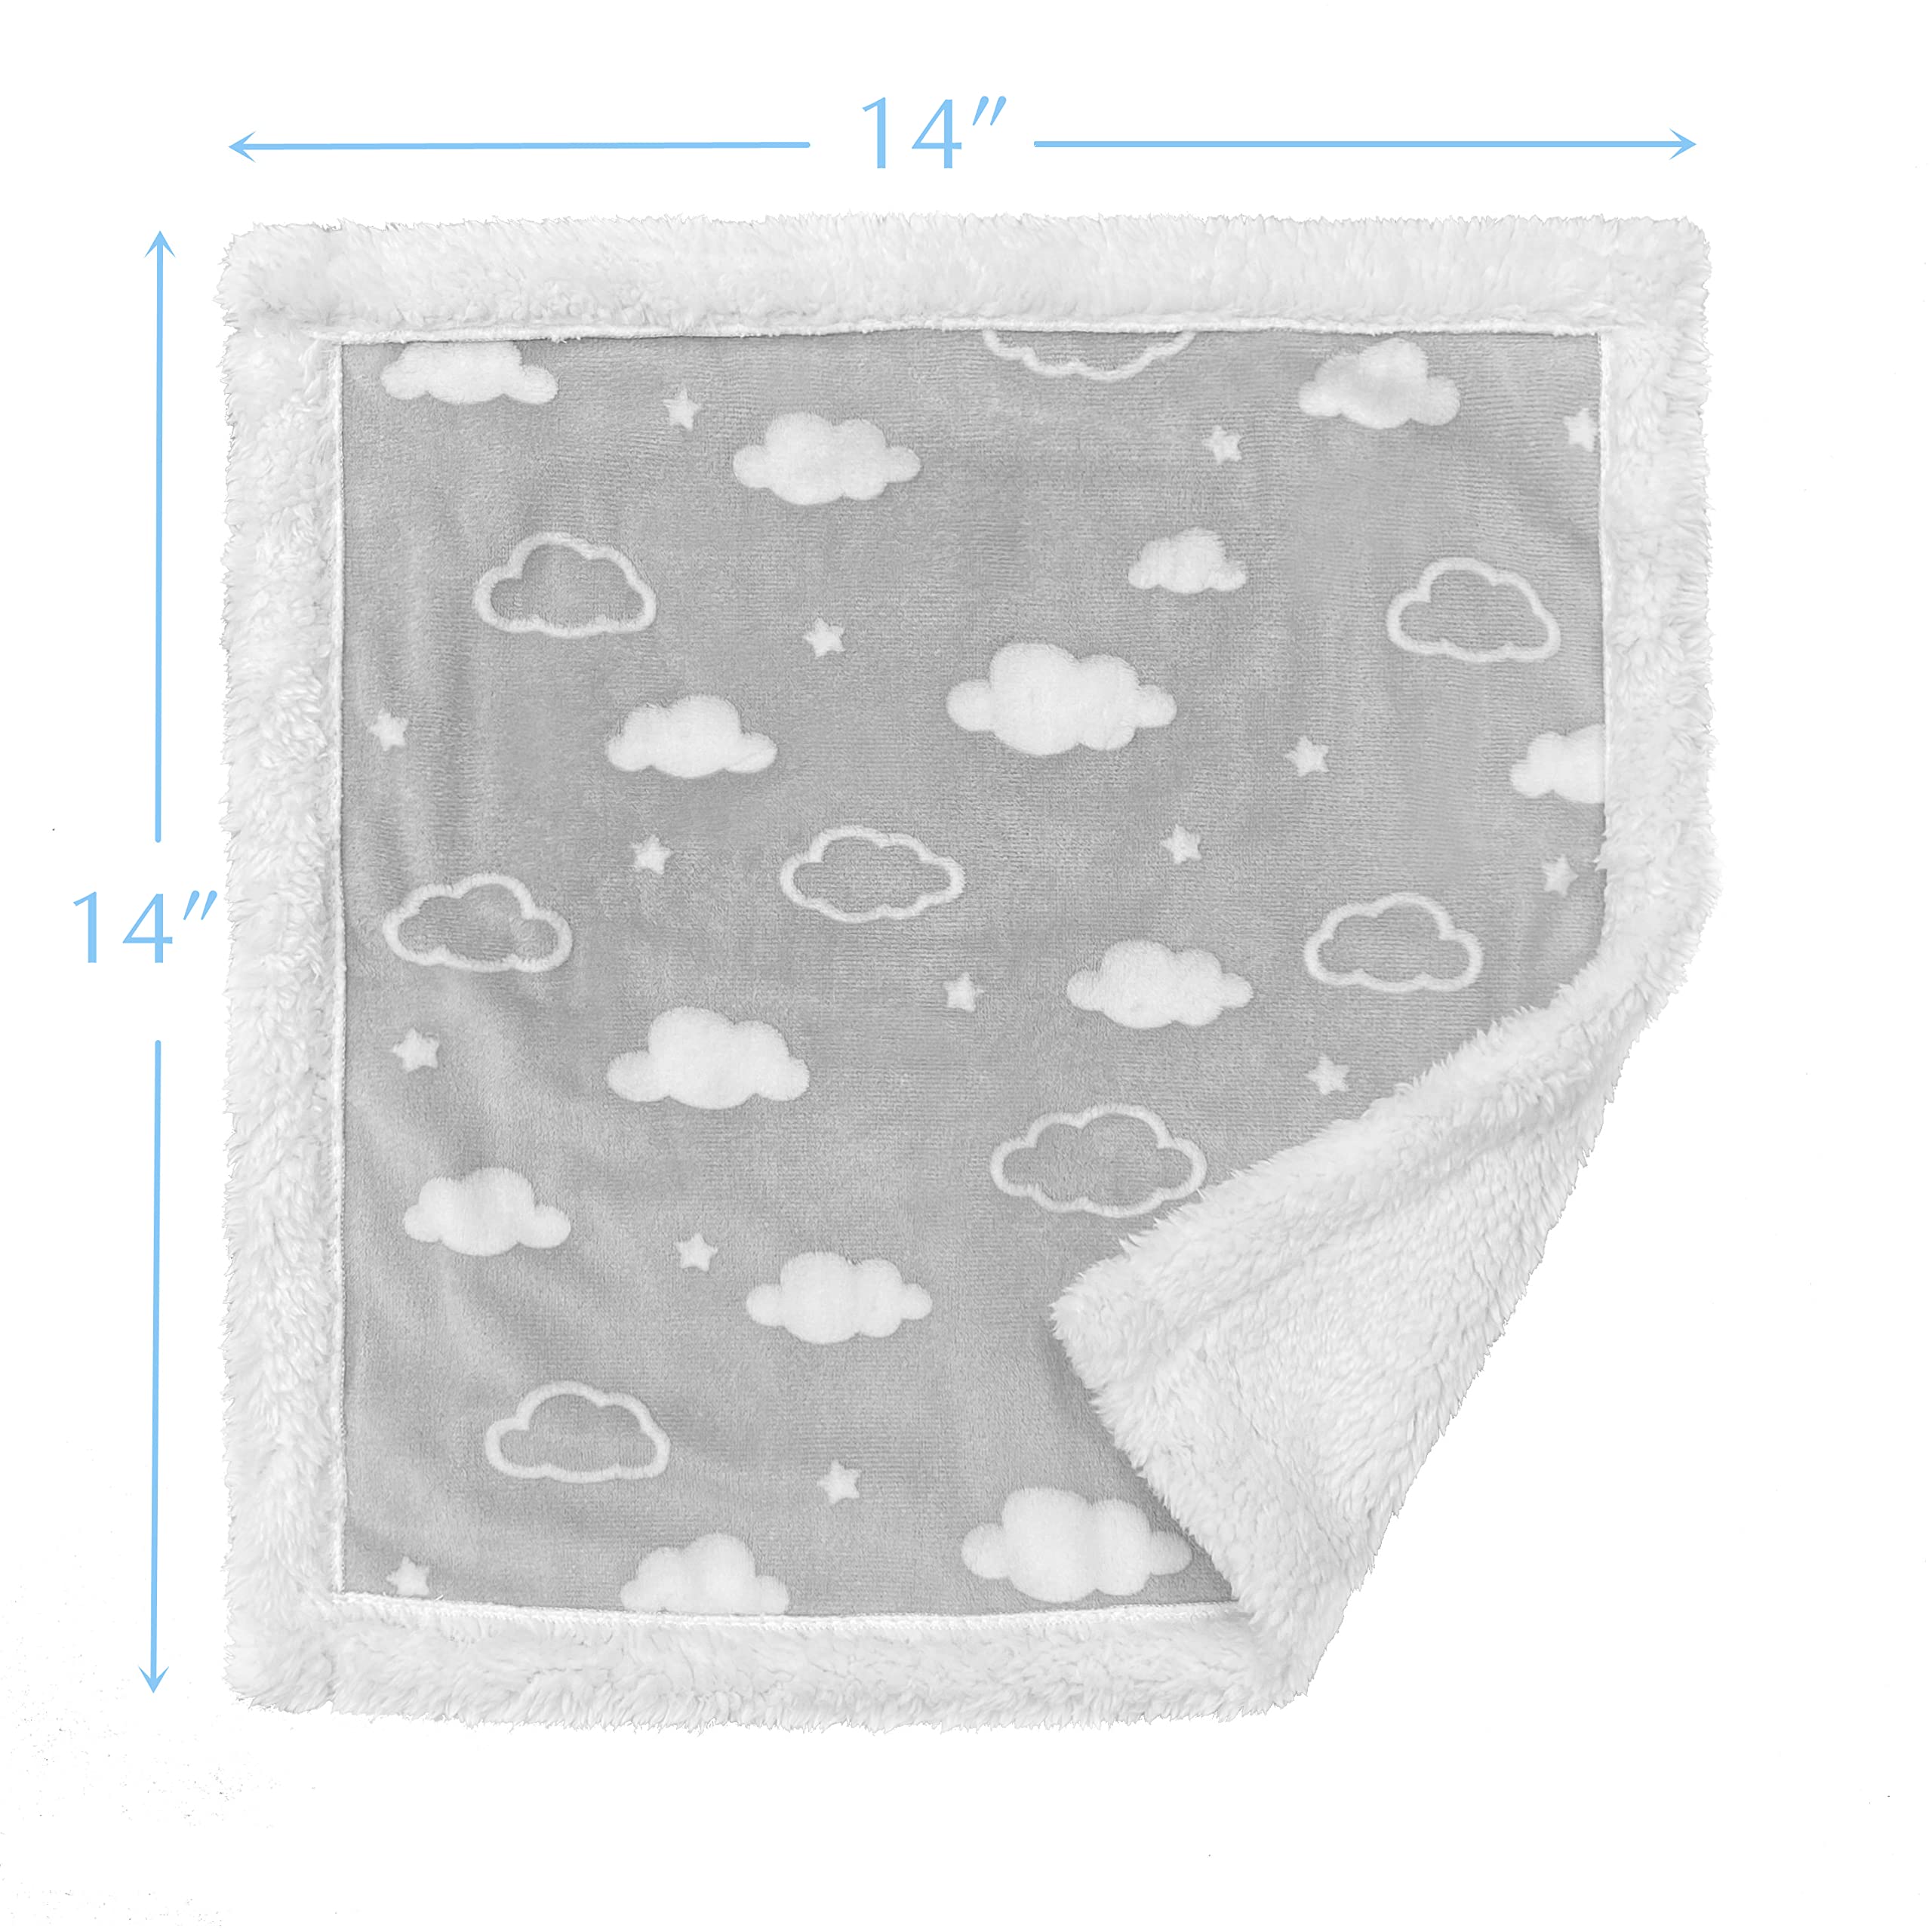 American Baby Company Heavenly Soft Chenille/Sherpa Security Blanket, Medium Gray 3D Cloud, 14